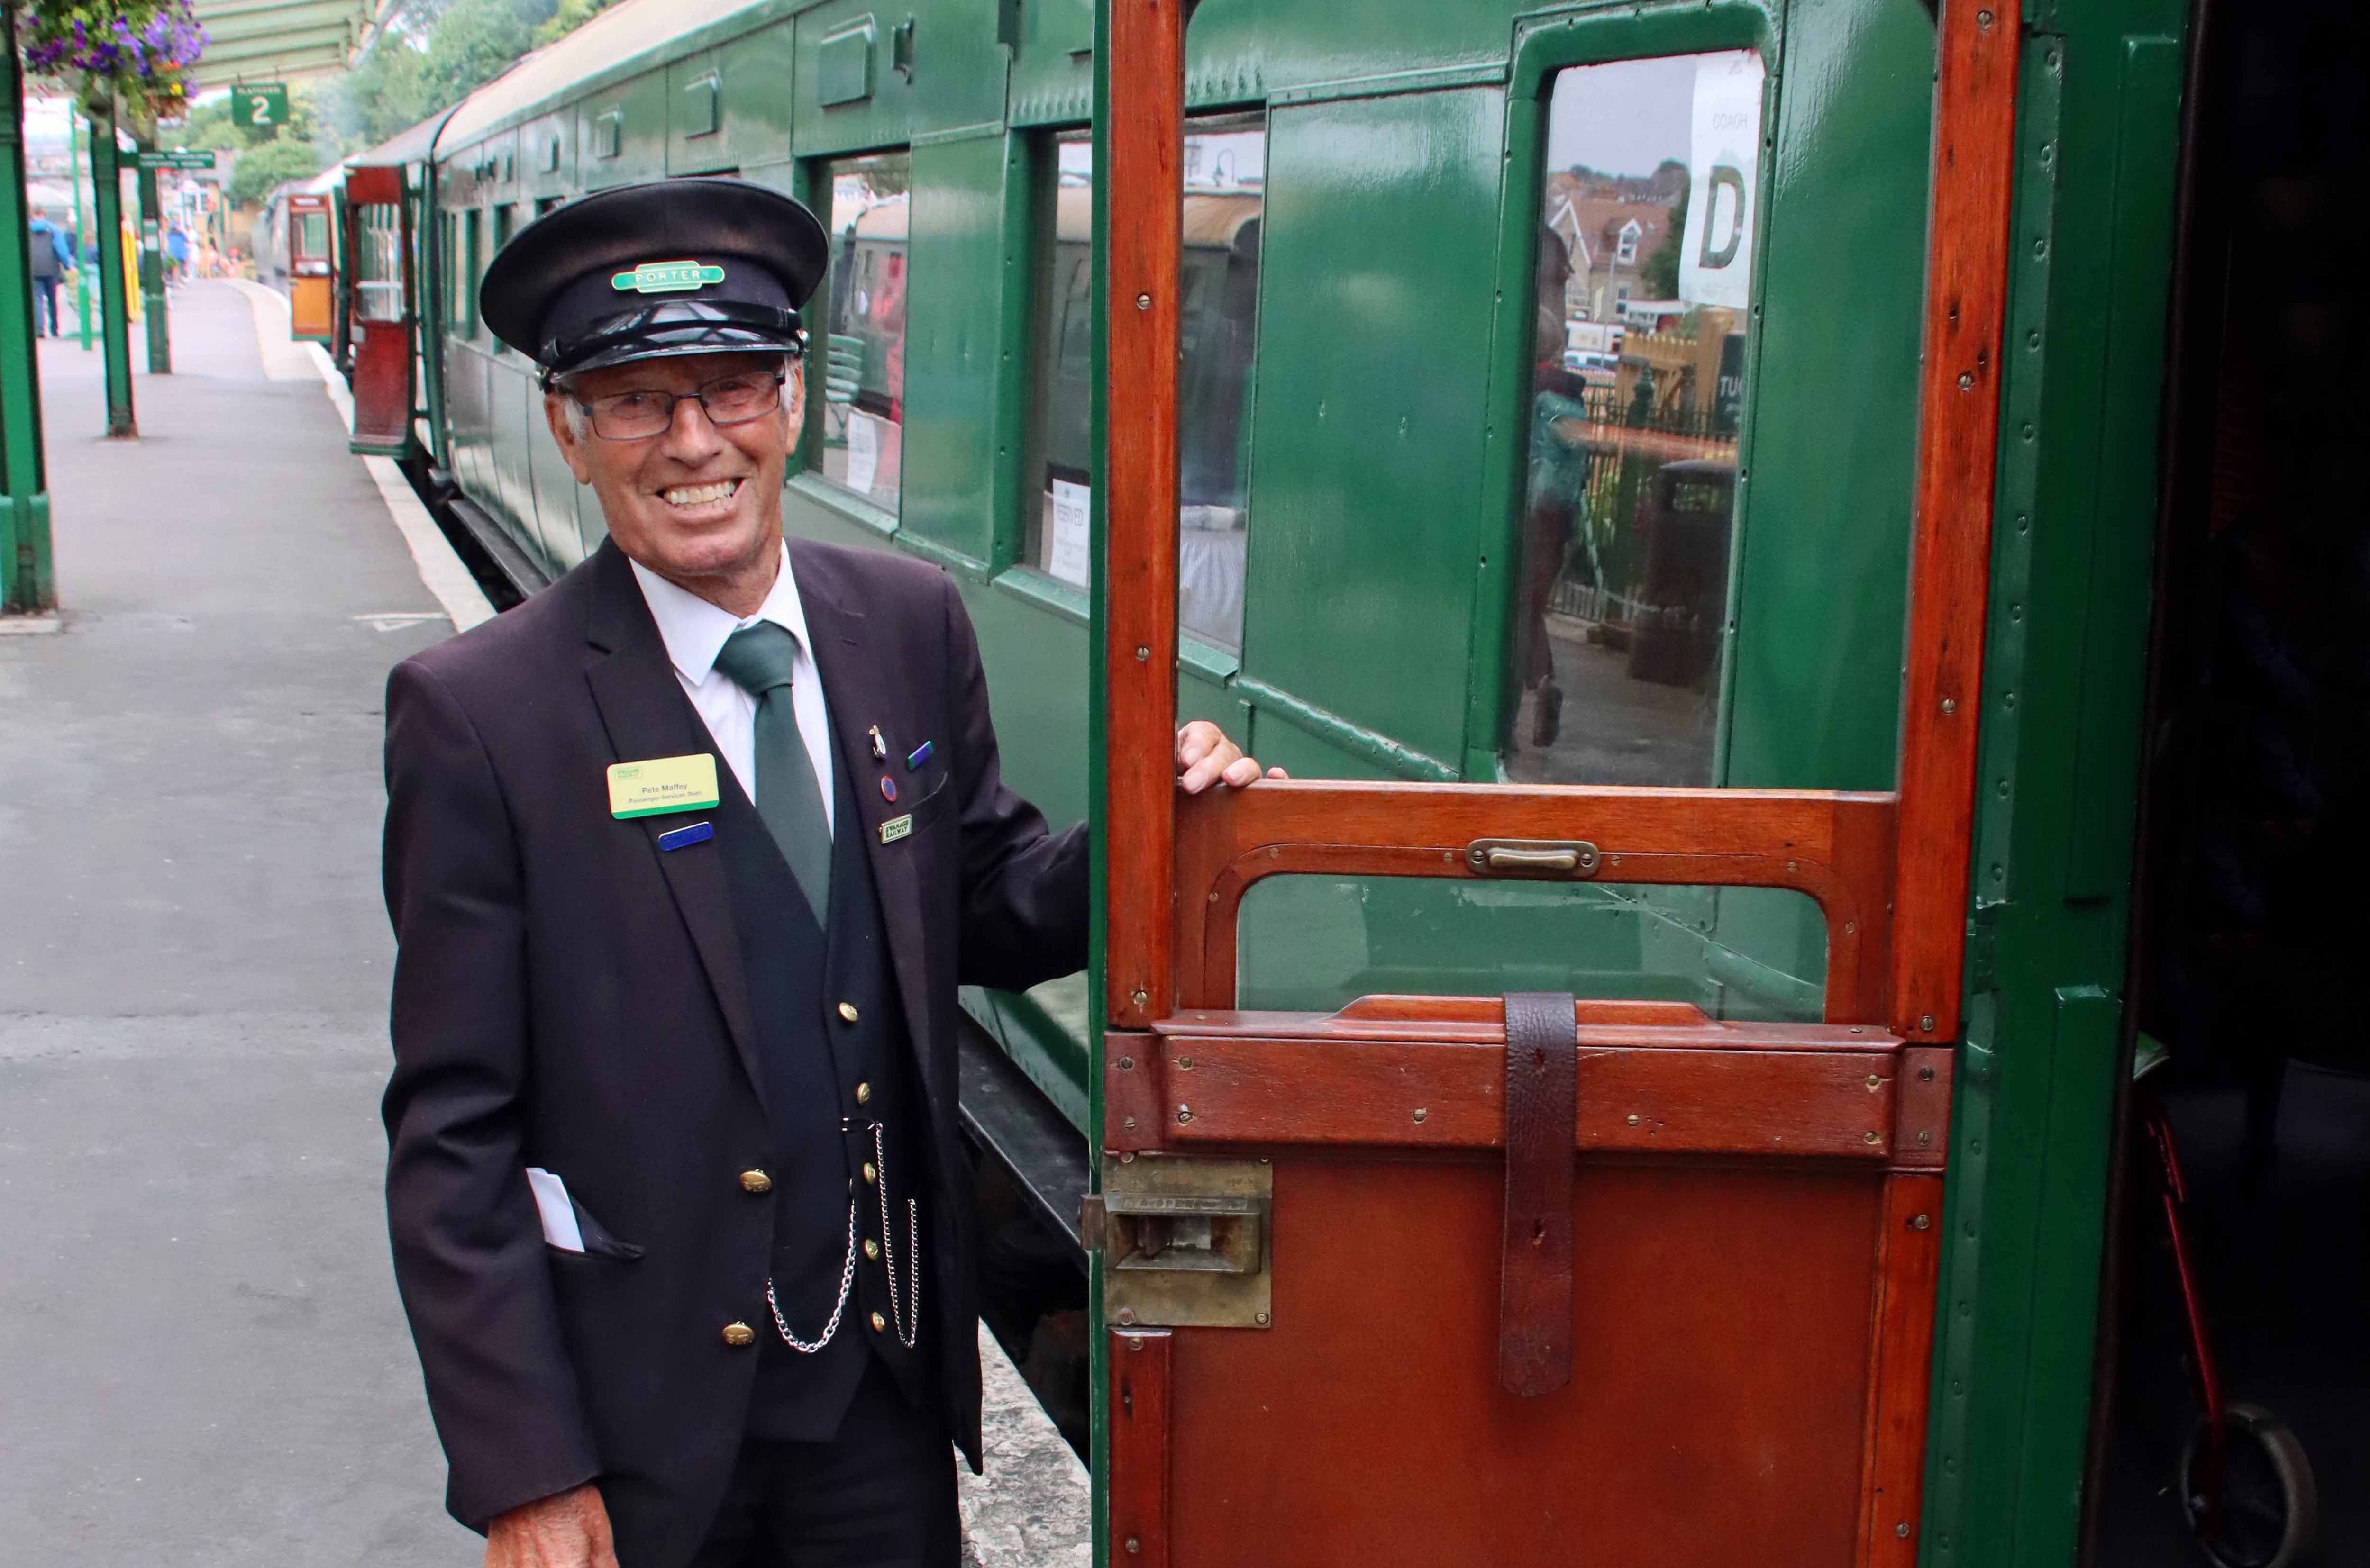 Community weekend to give rare behind the scenes look at railway